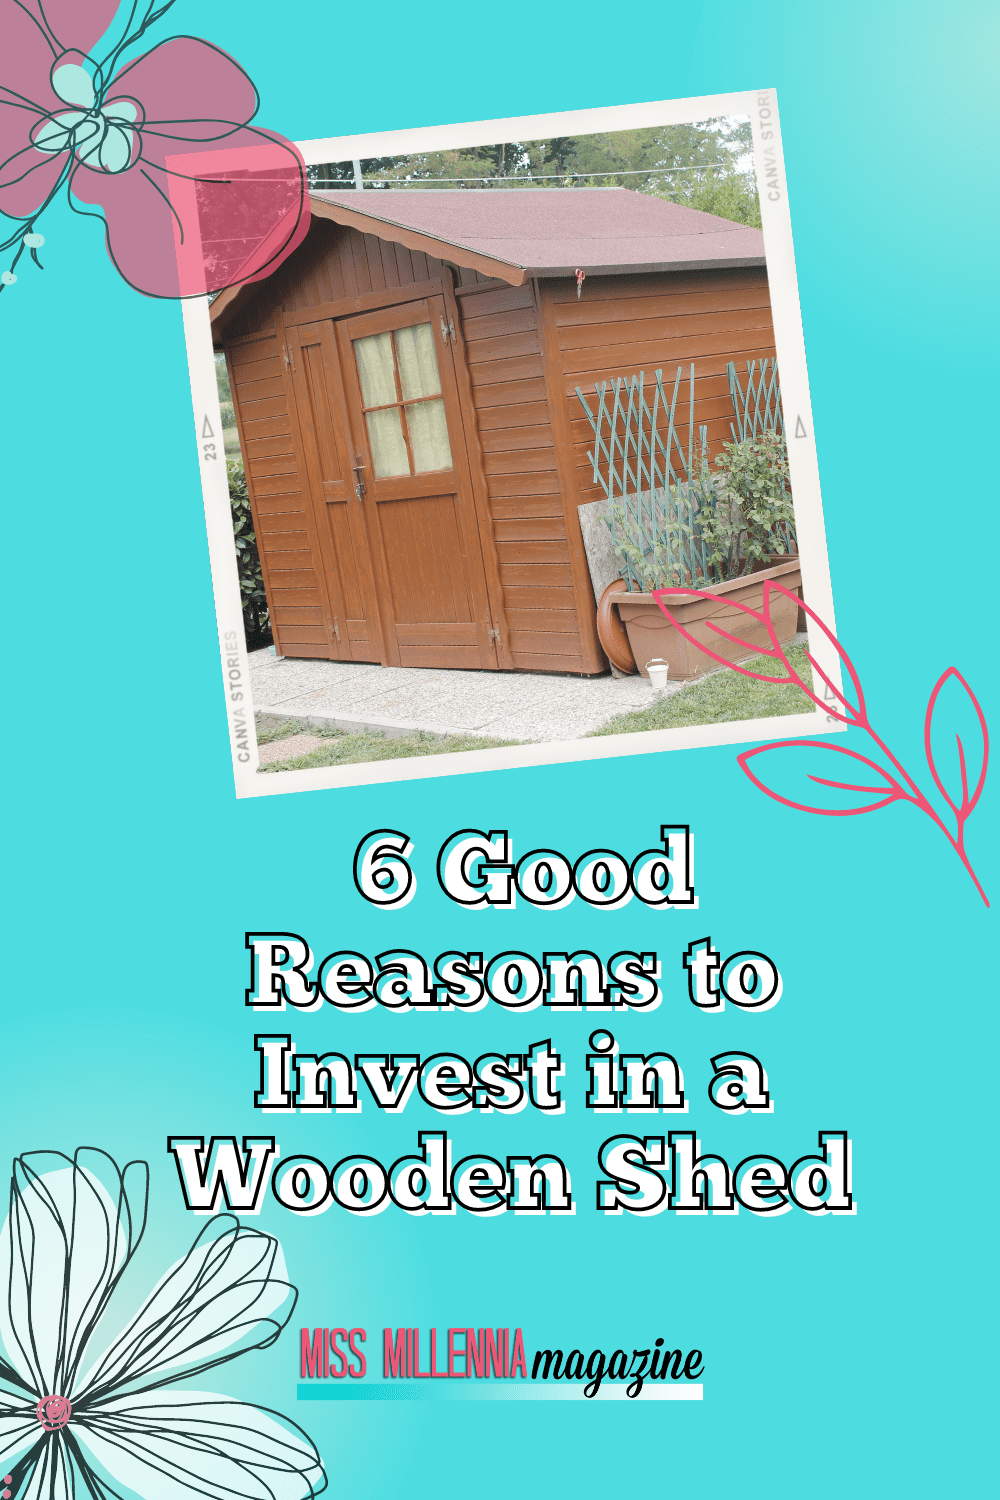 6 Good Reasons to Invest in a Wooden Shed